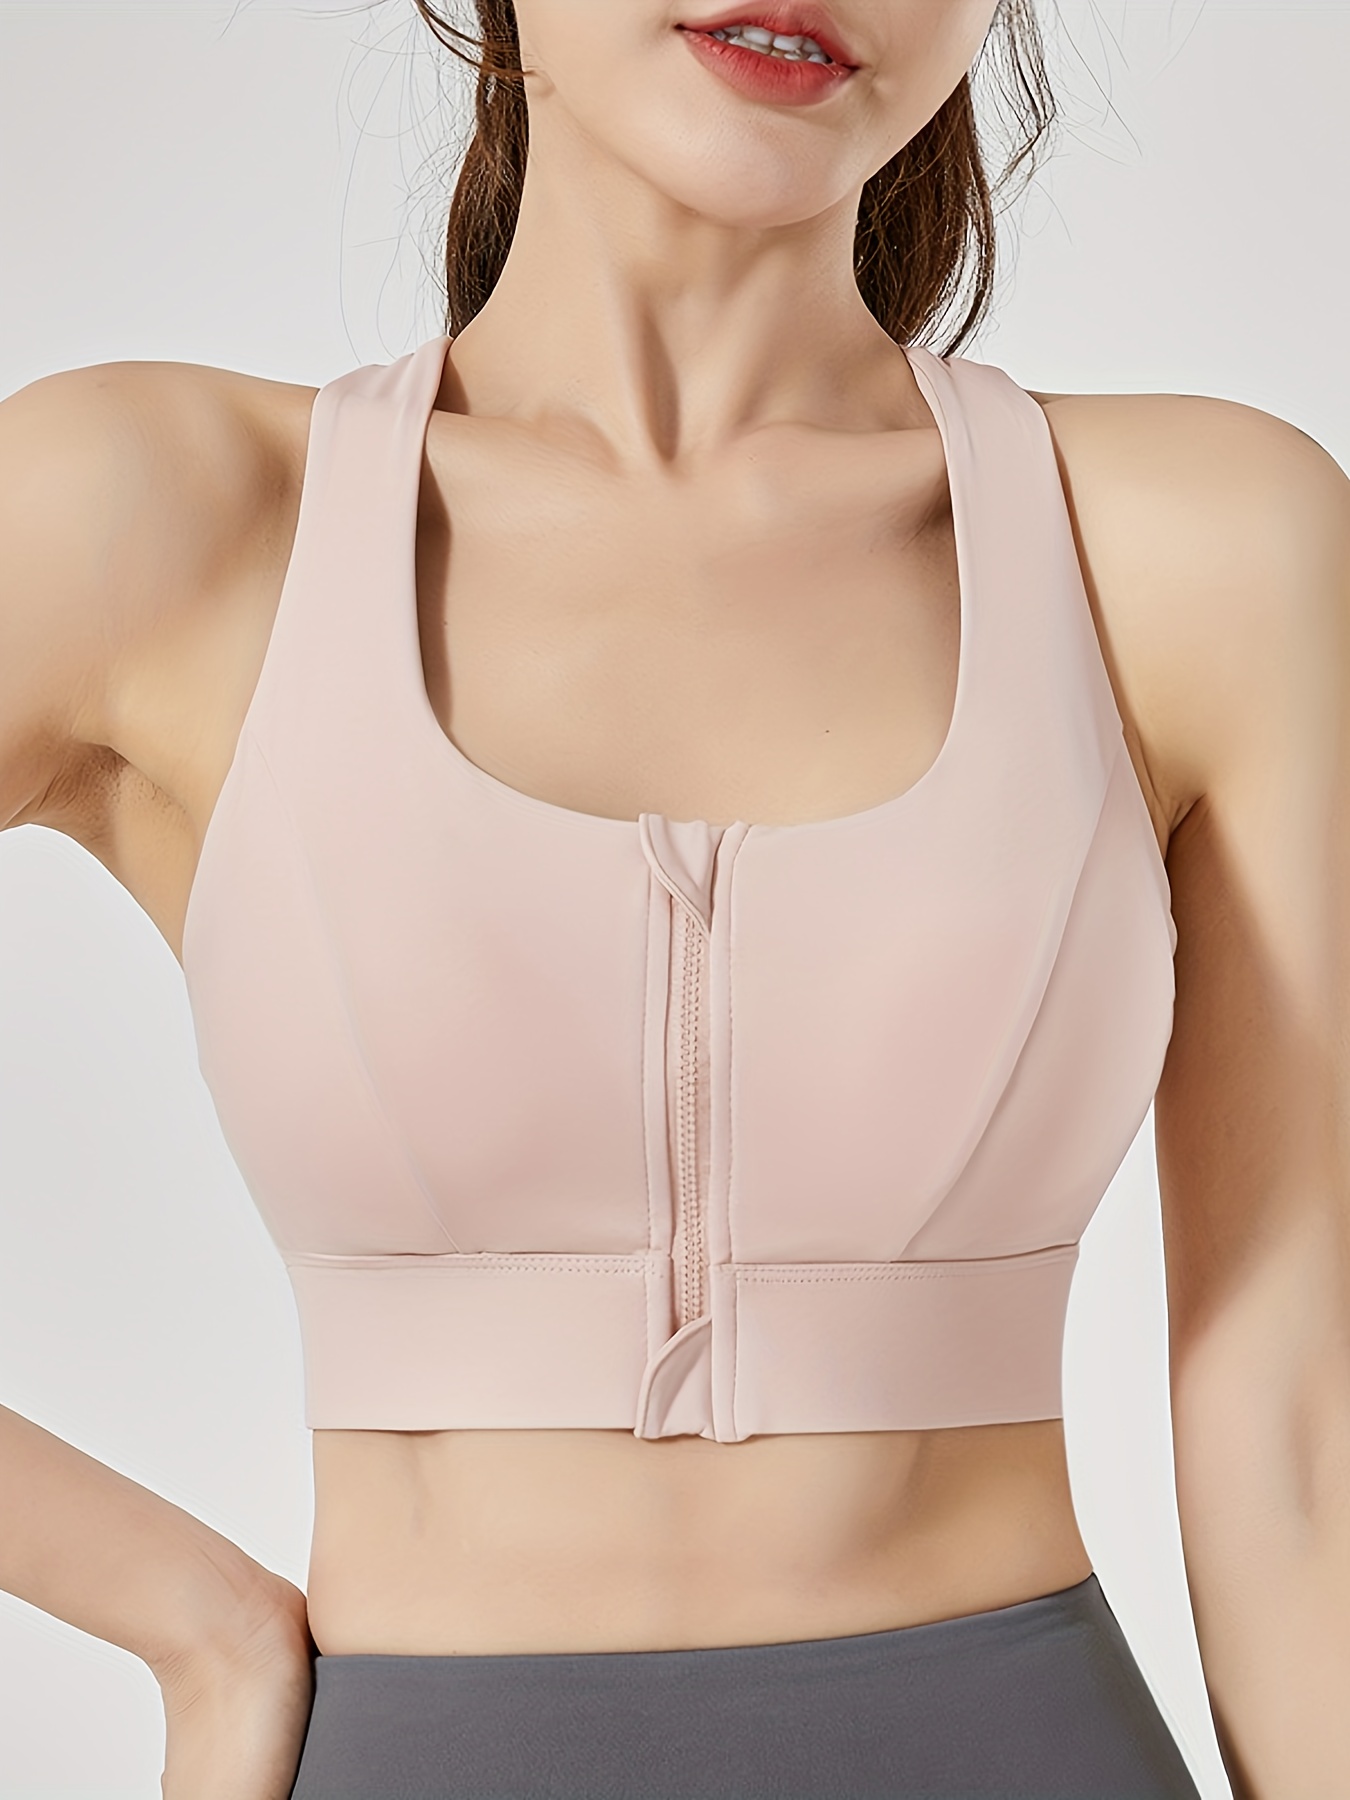 Yoga Outfit S 2XL Sports Bra Women Shockproof Gathering Running